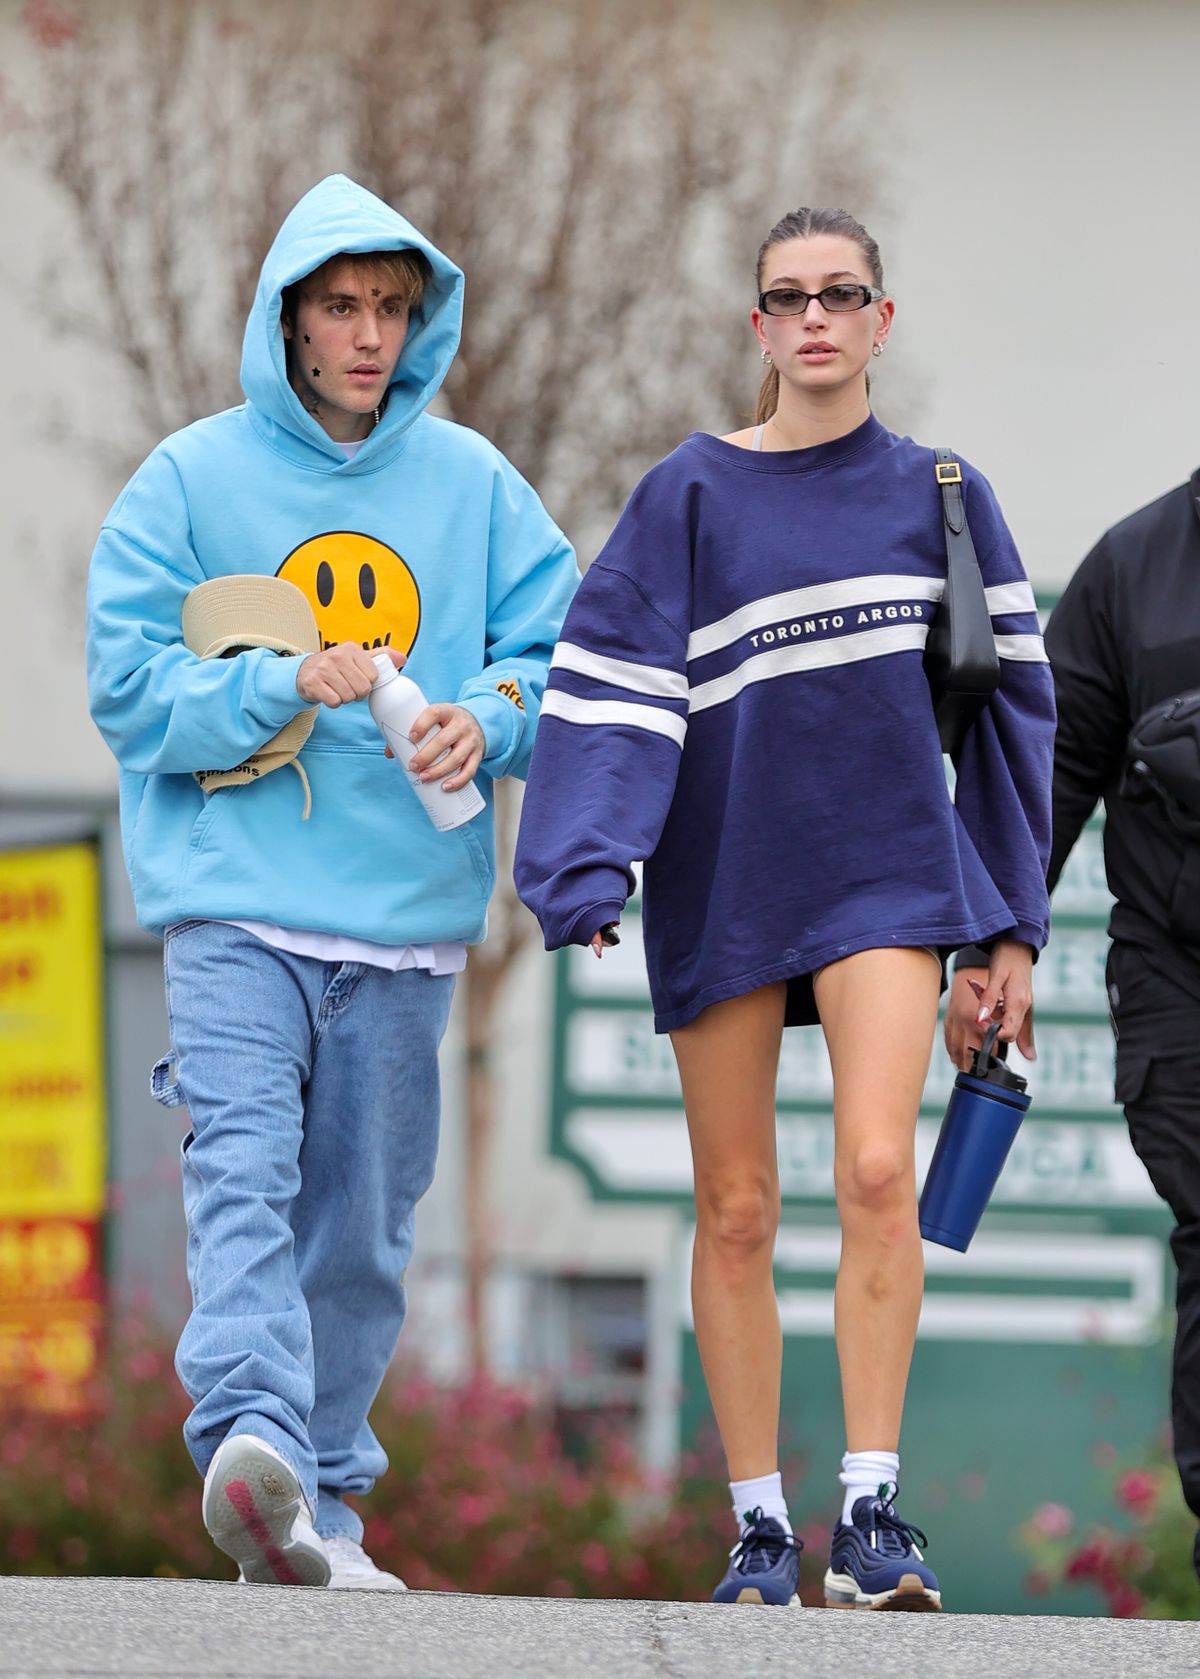 Hailey Justin Bieber criticised for 'dumb' comments 1 famous